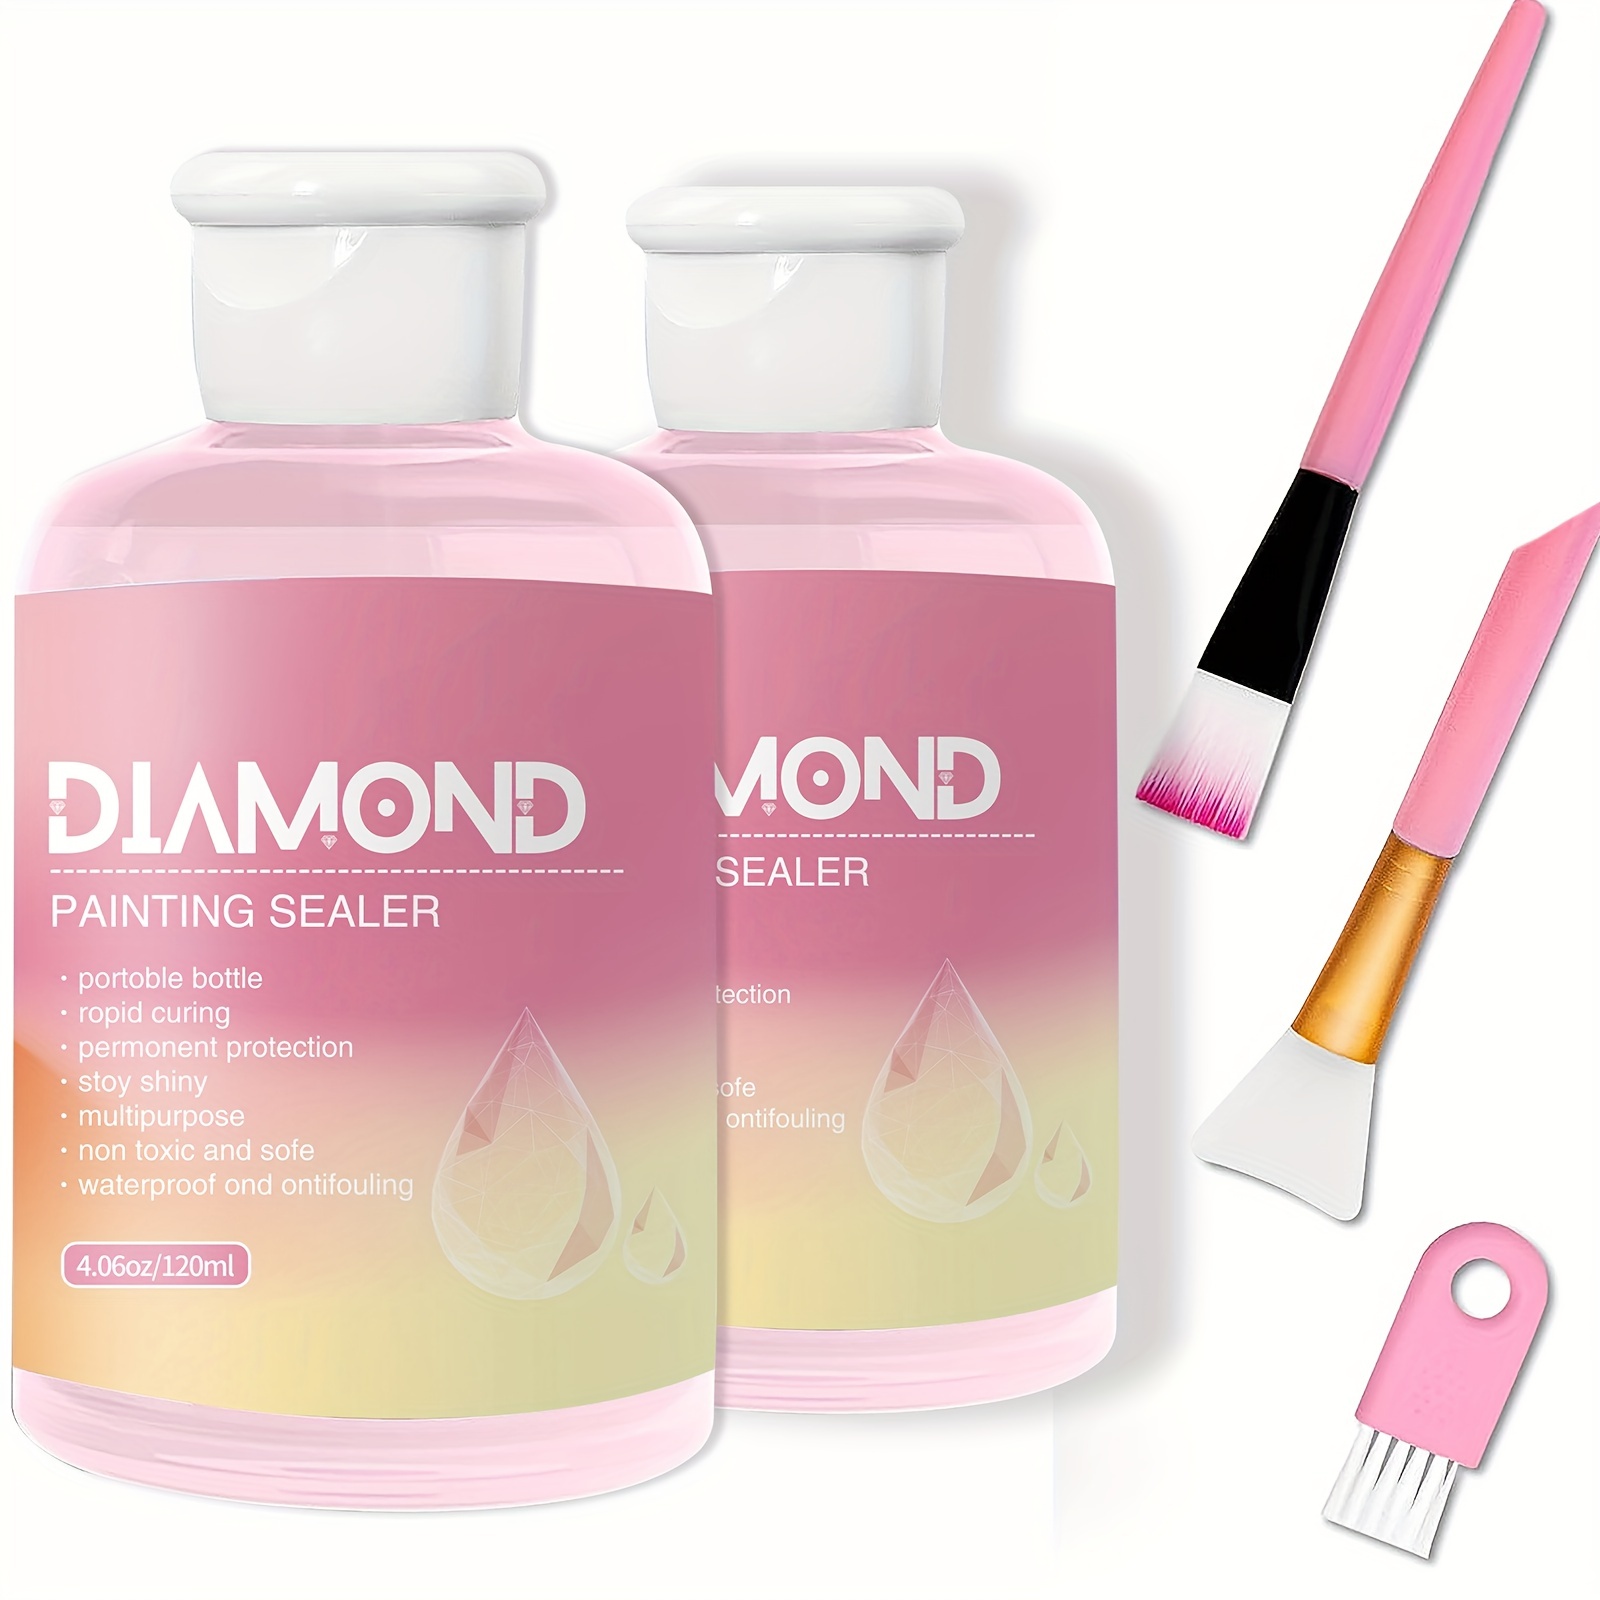 

Diamond Painting Sealer Kits 120ml With 3 Pcs Brushes, Diamond Art Sealer Puzzle Glue Diamond Painting Accessories And Tools For Adults (4oz)